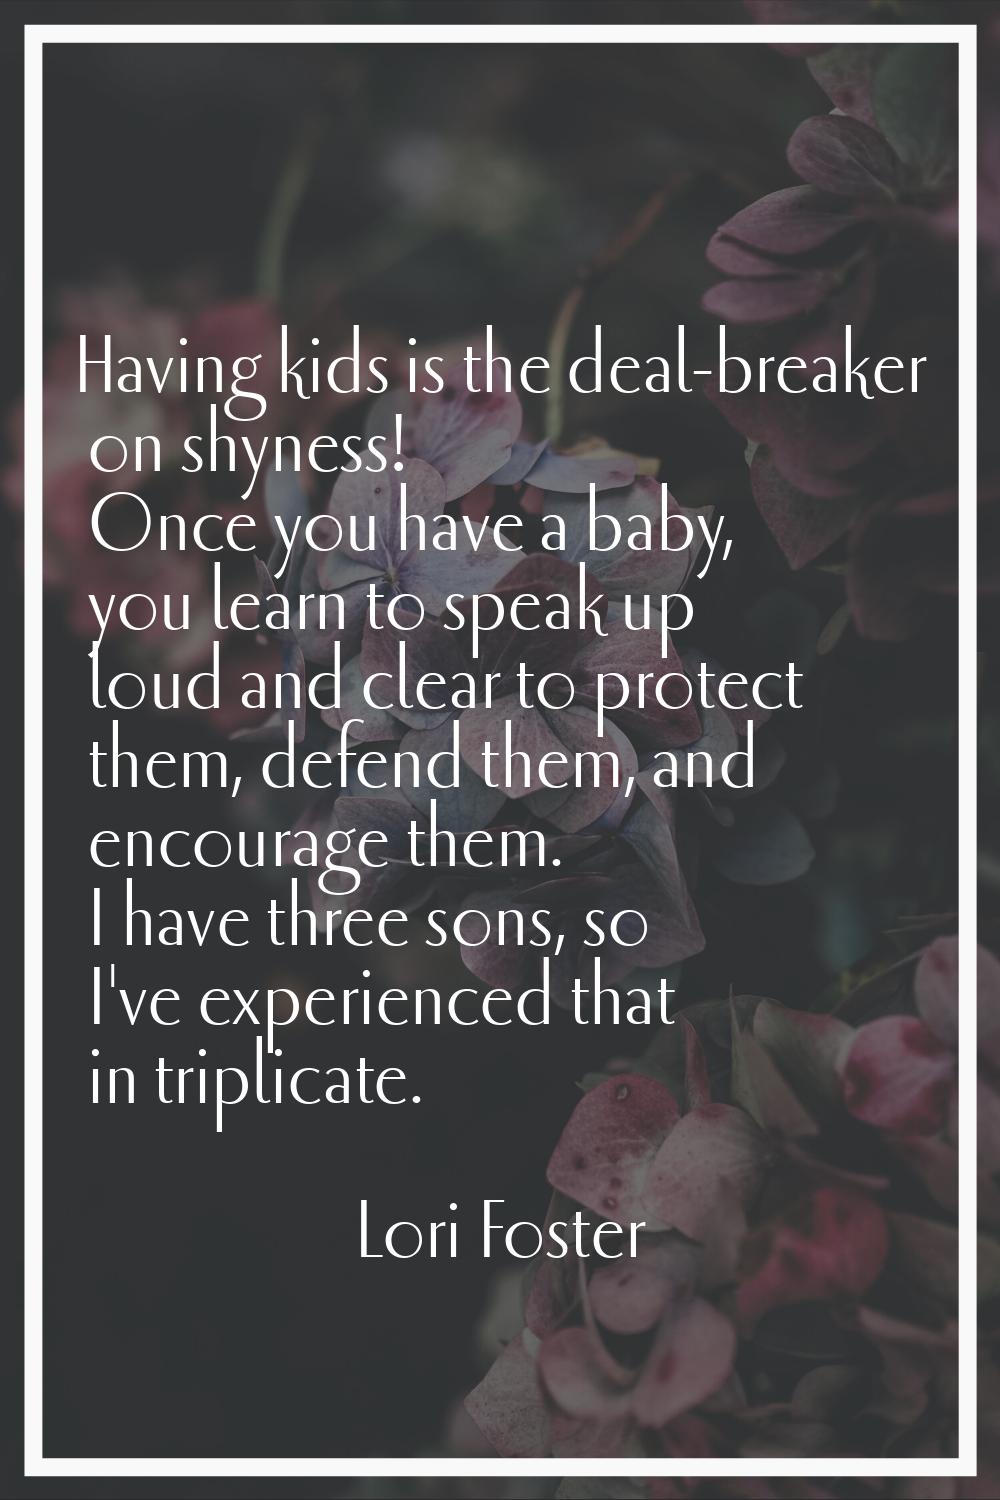 Having kids is the deal-breaker on shyness! Once you have a baby, you learn to speak up loud and cl